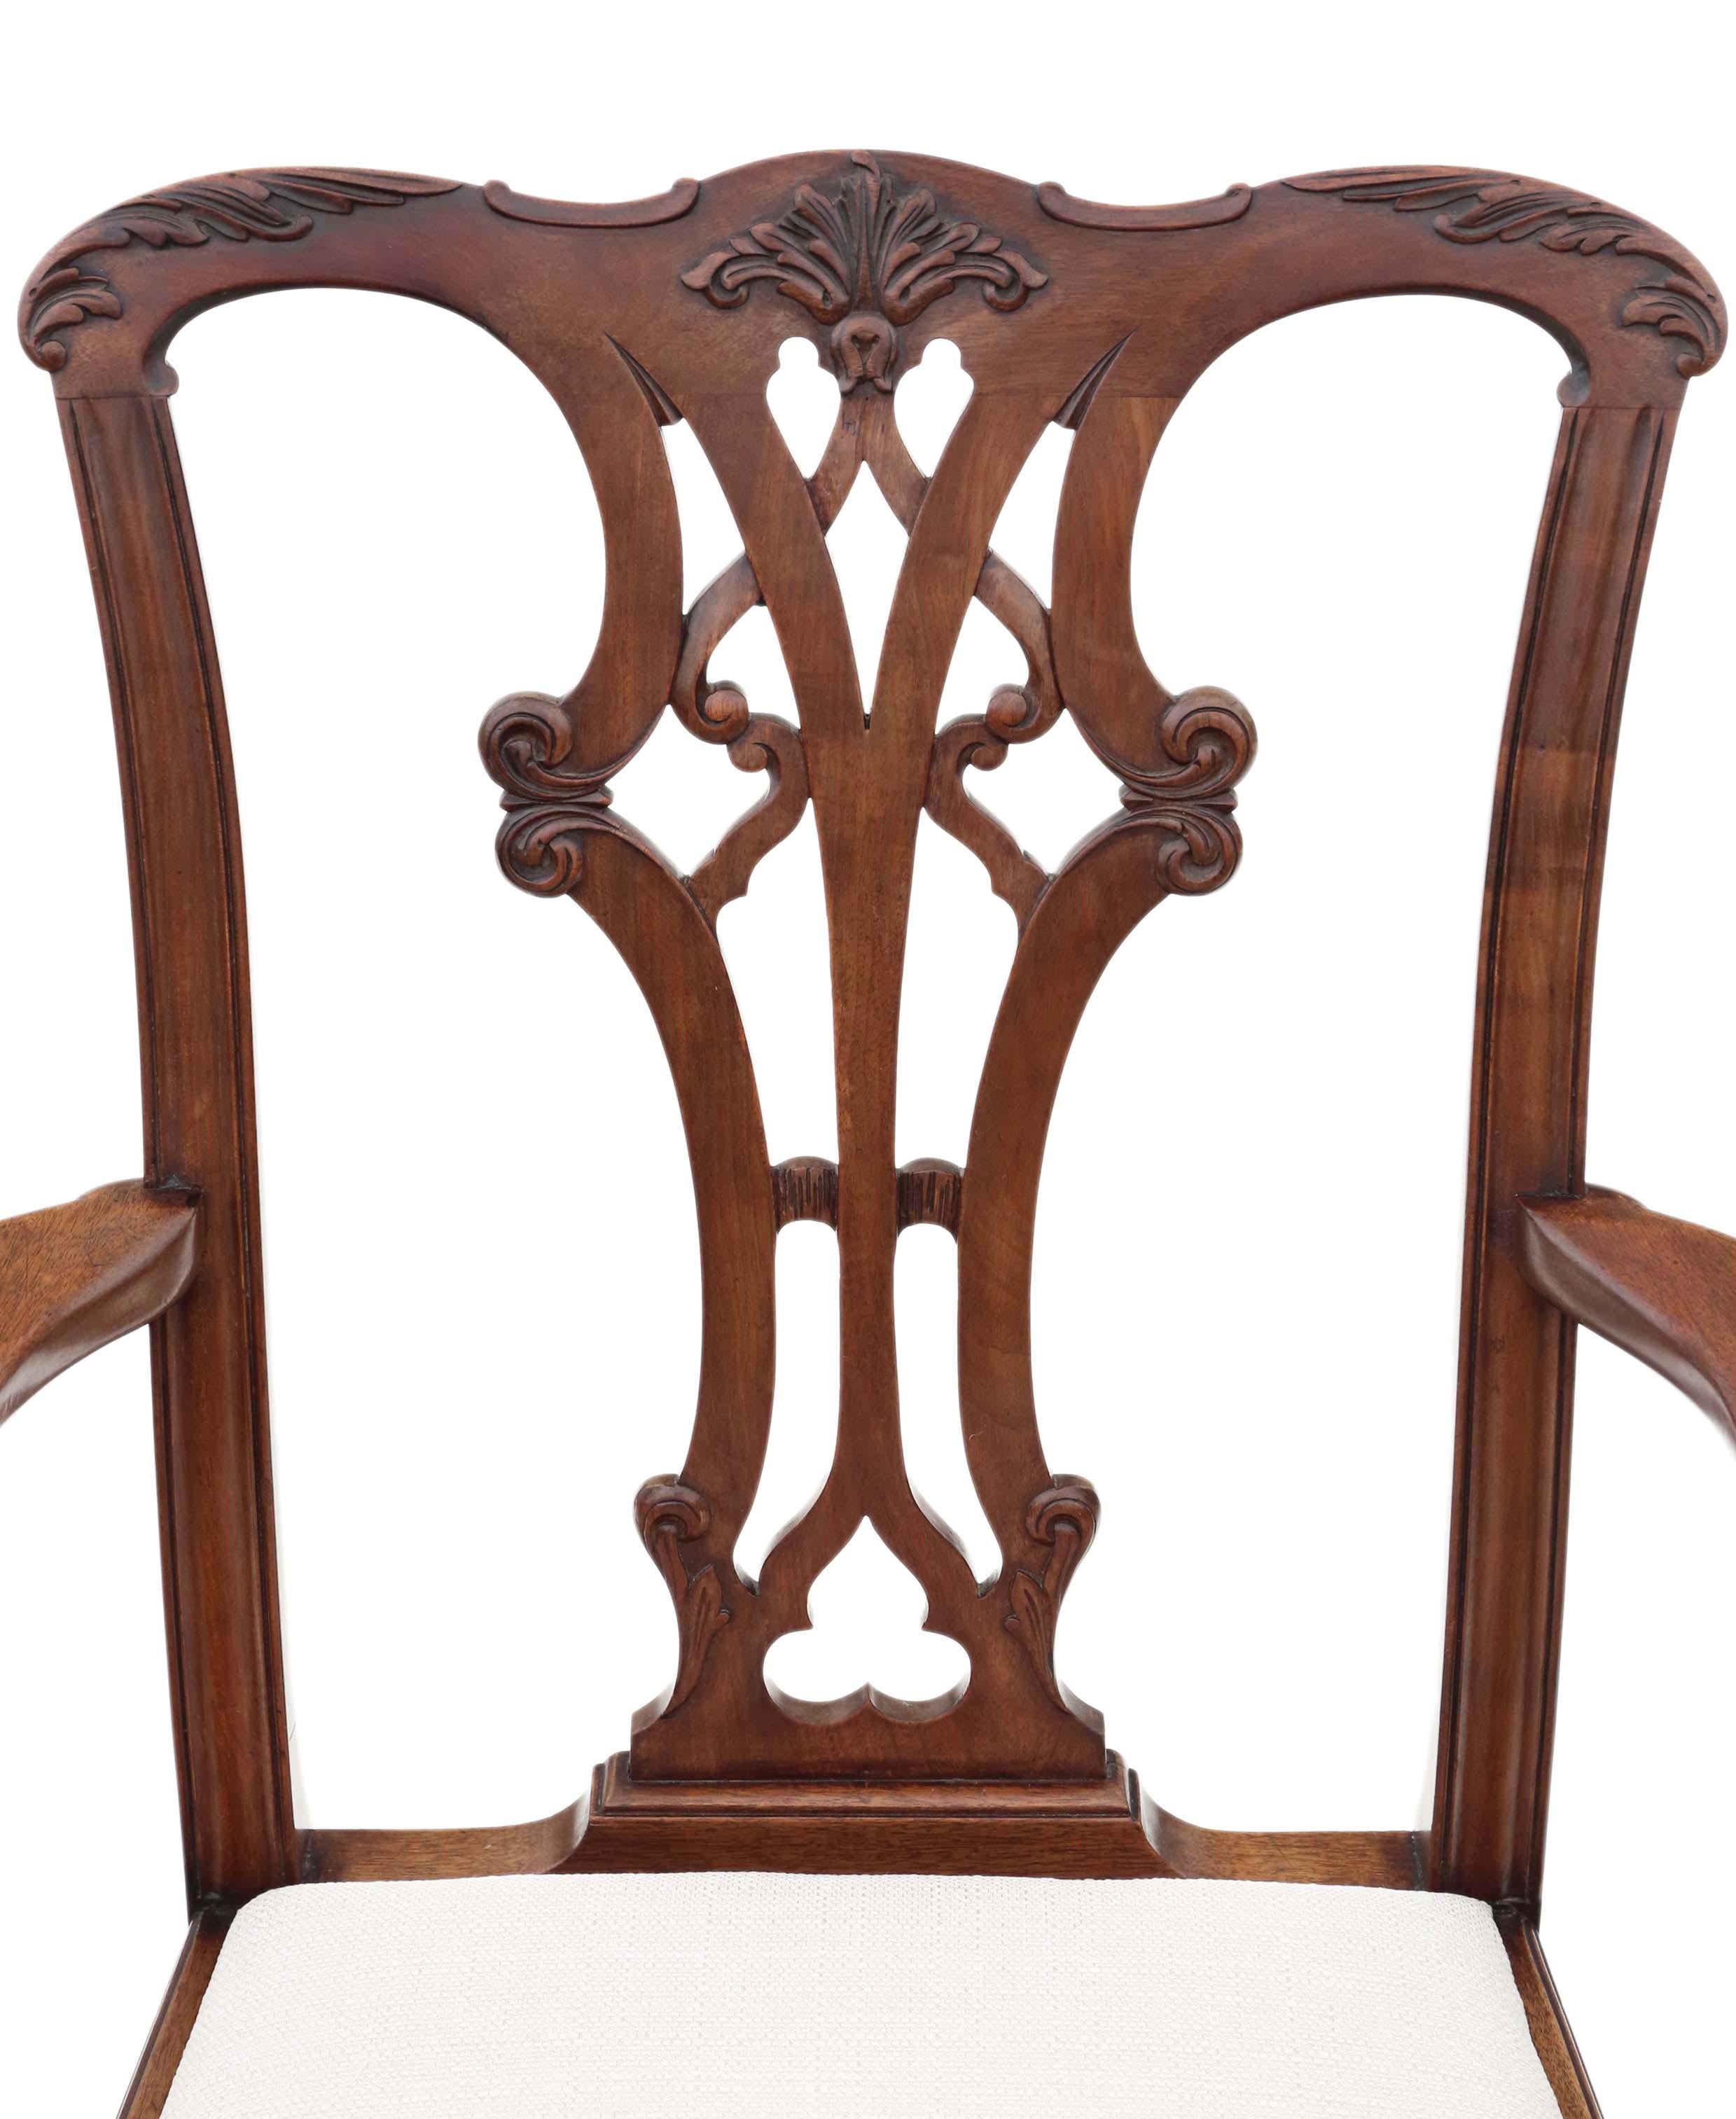 Wood Georgian Revival Mahogany Dining Chairs: Set of 8 (6+2), Antique Quality, C1910 For Sale